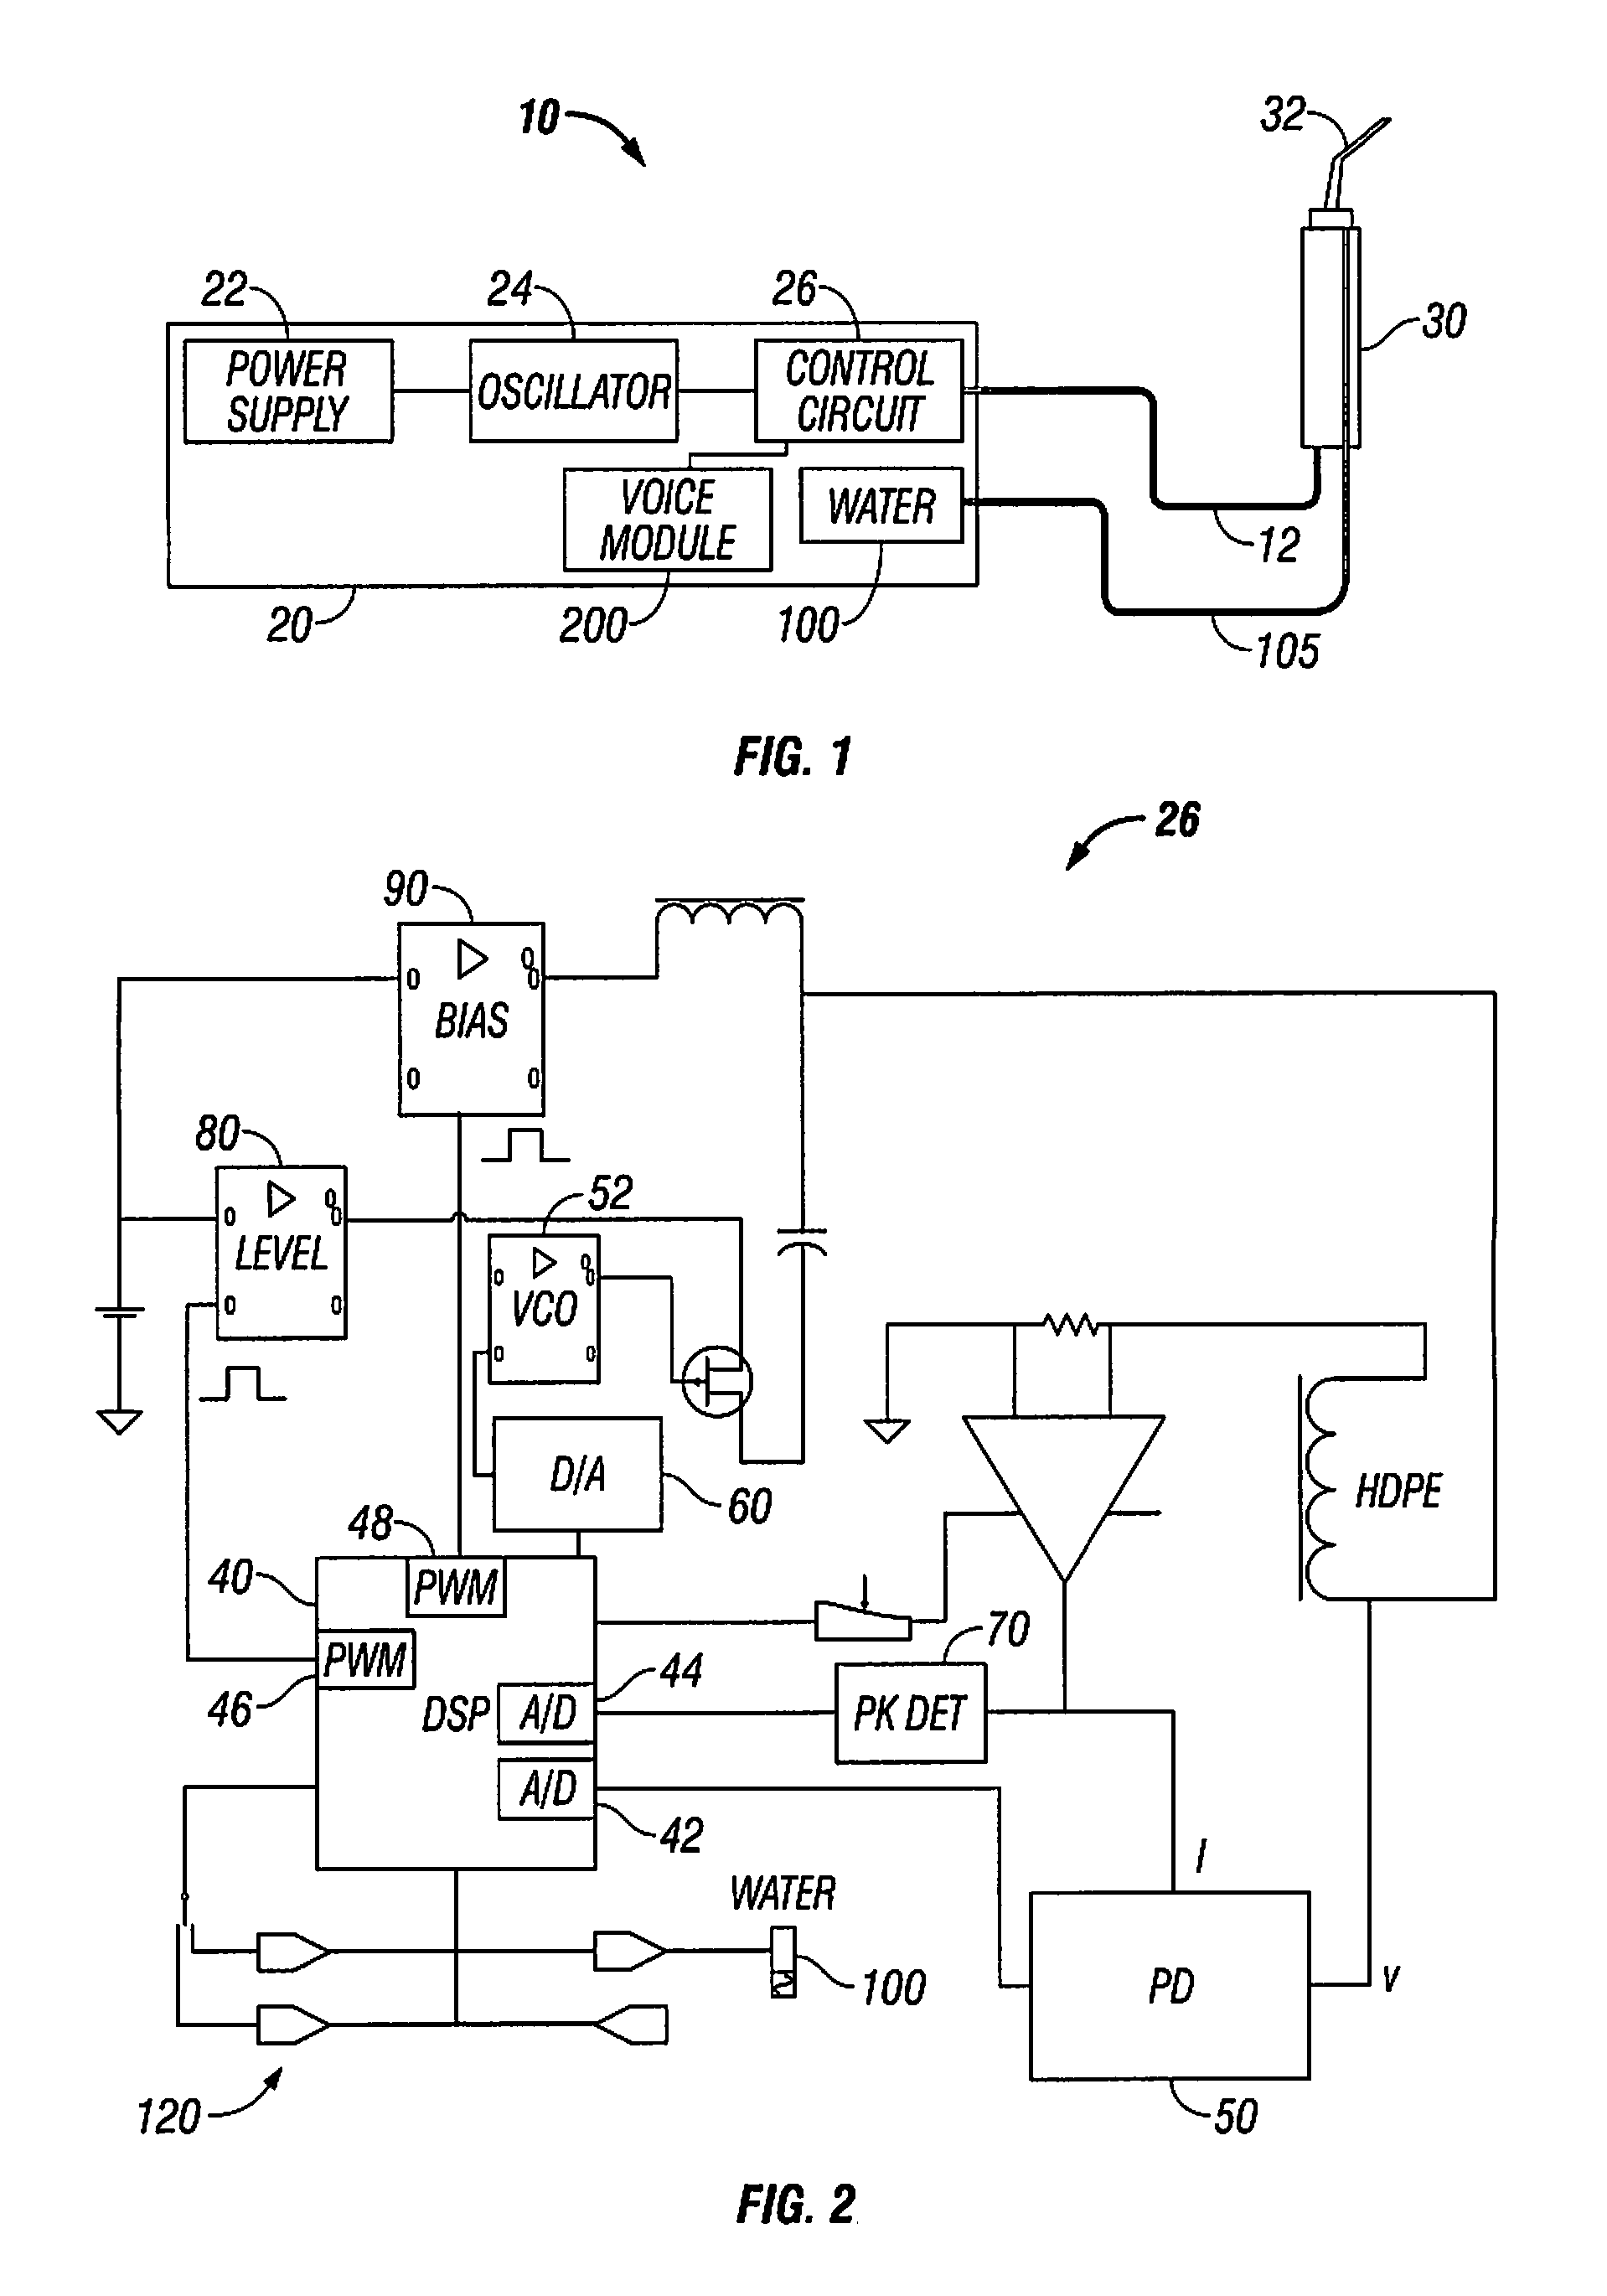 System and method for dynamic control of ultrasonic magnetostrictive dental scaler